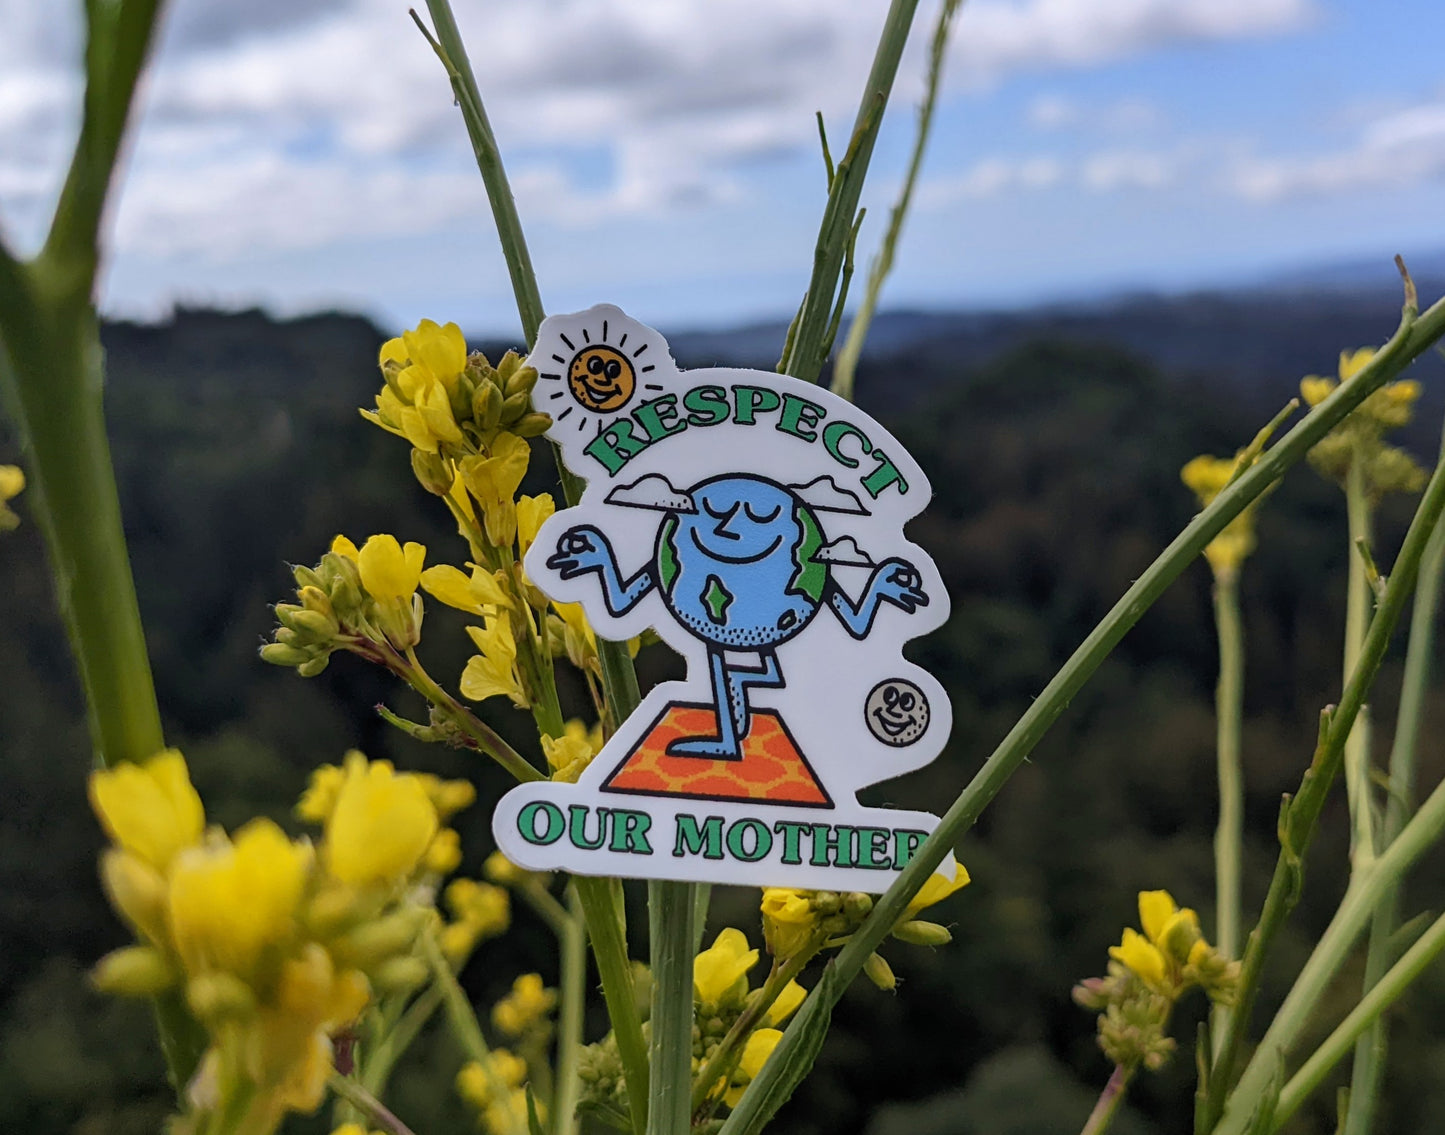 Respect our Mother sticker with Peaceful Earth, Sun and Moon with wildflowers and mountainscape in background